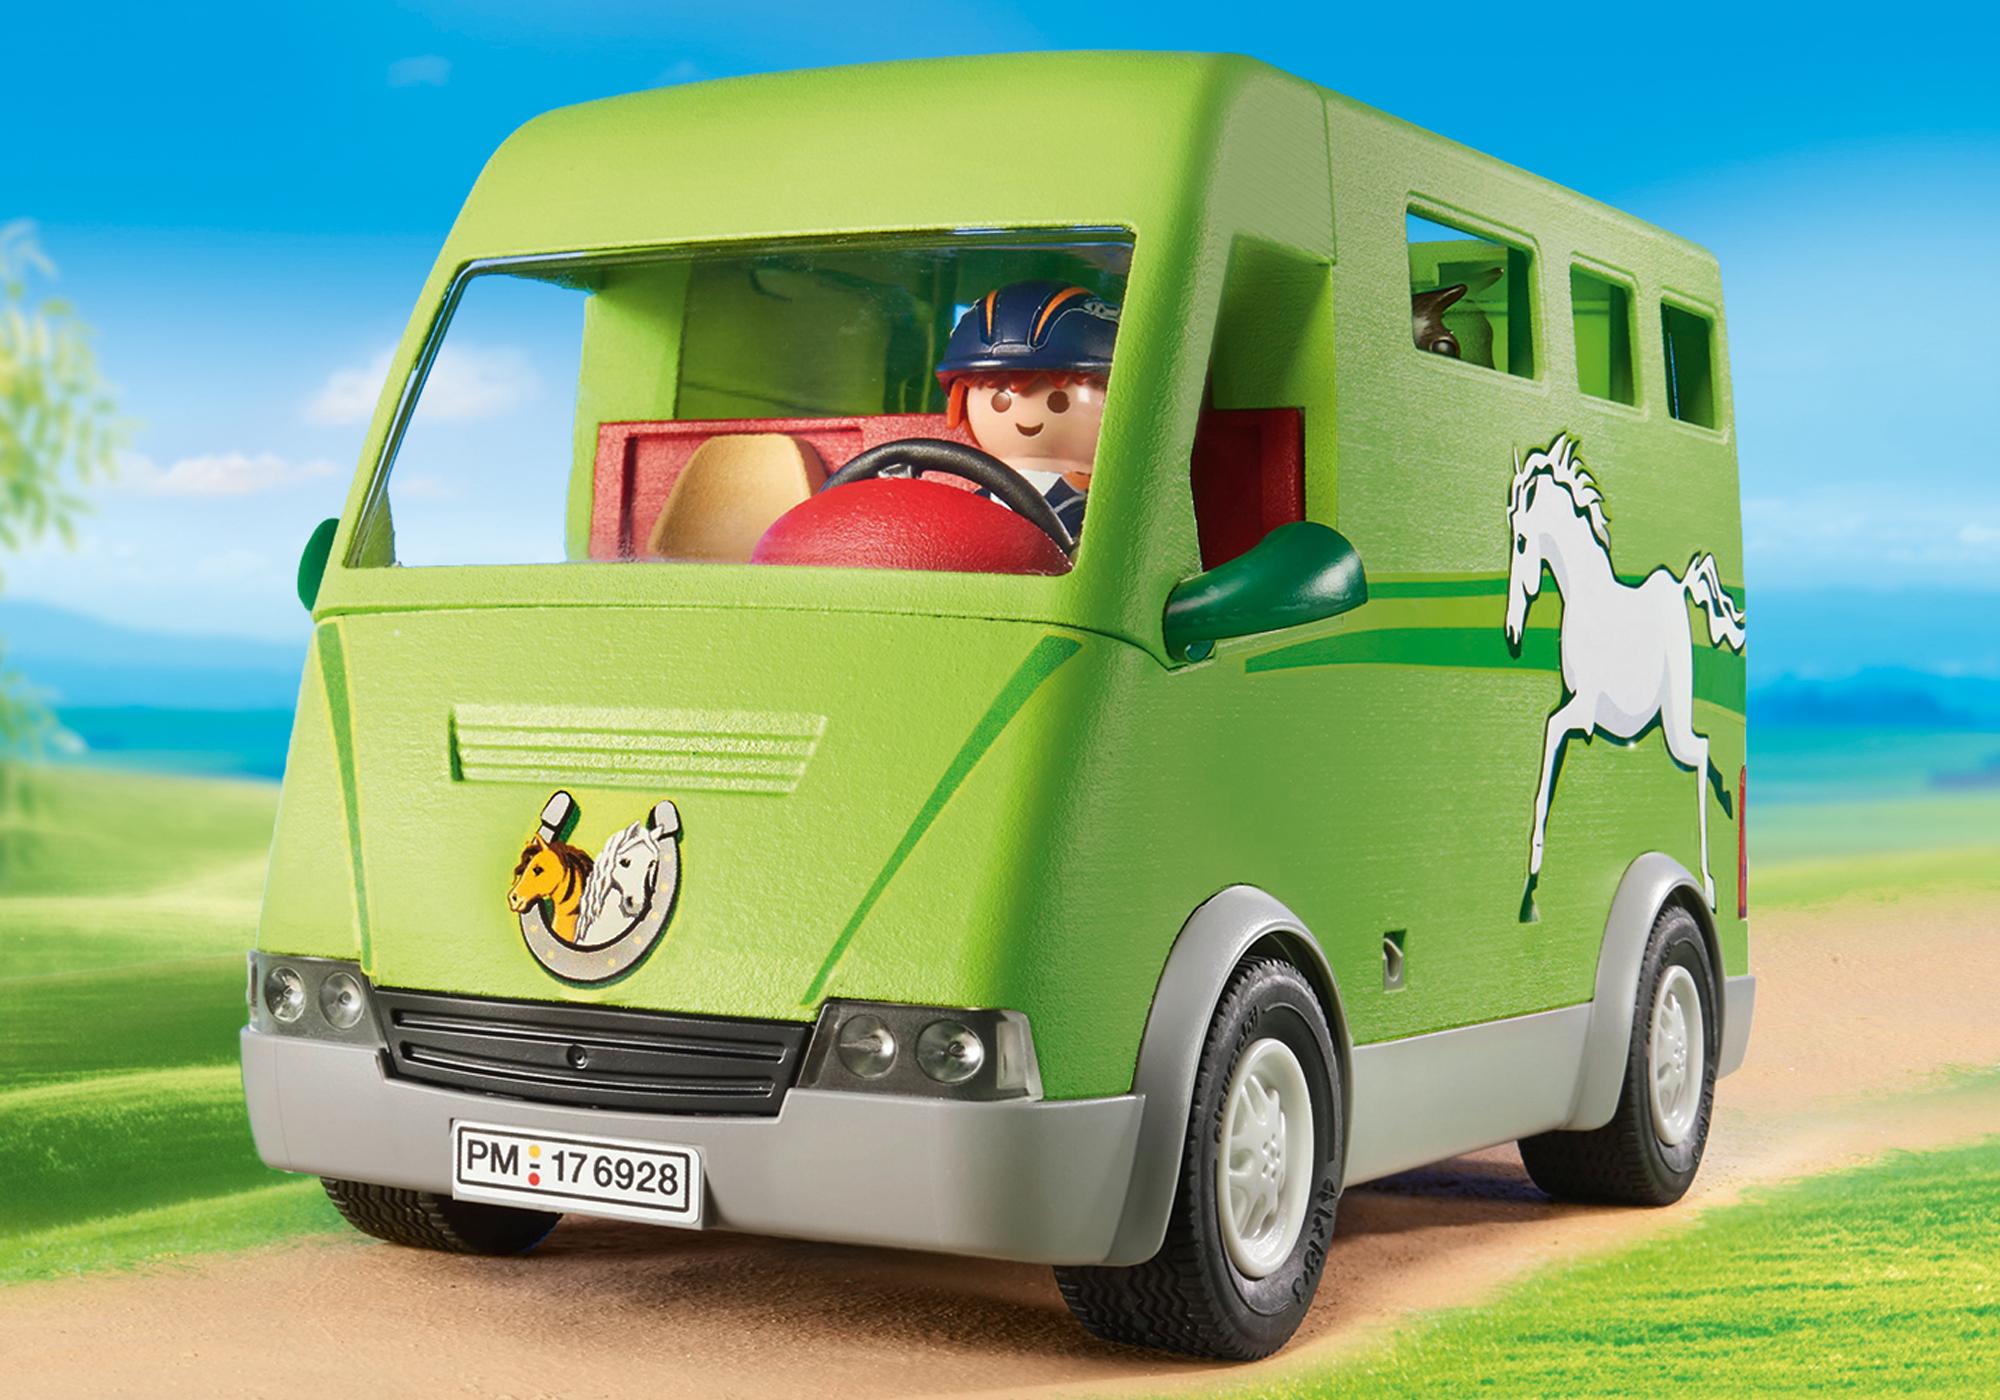 playmobil camion chevaux